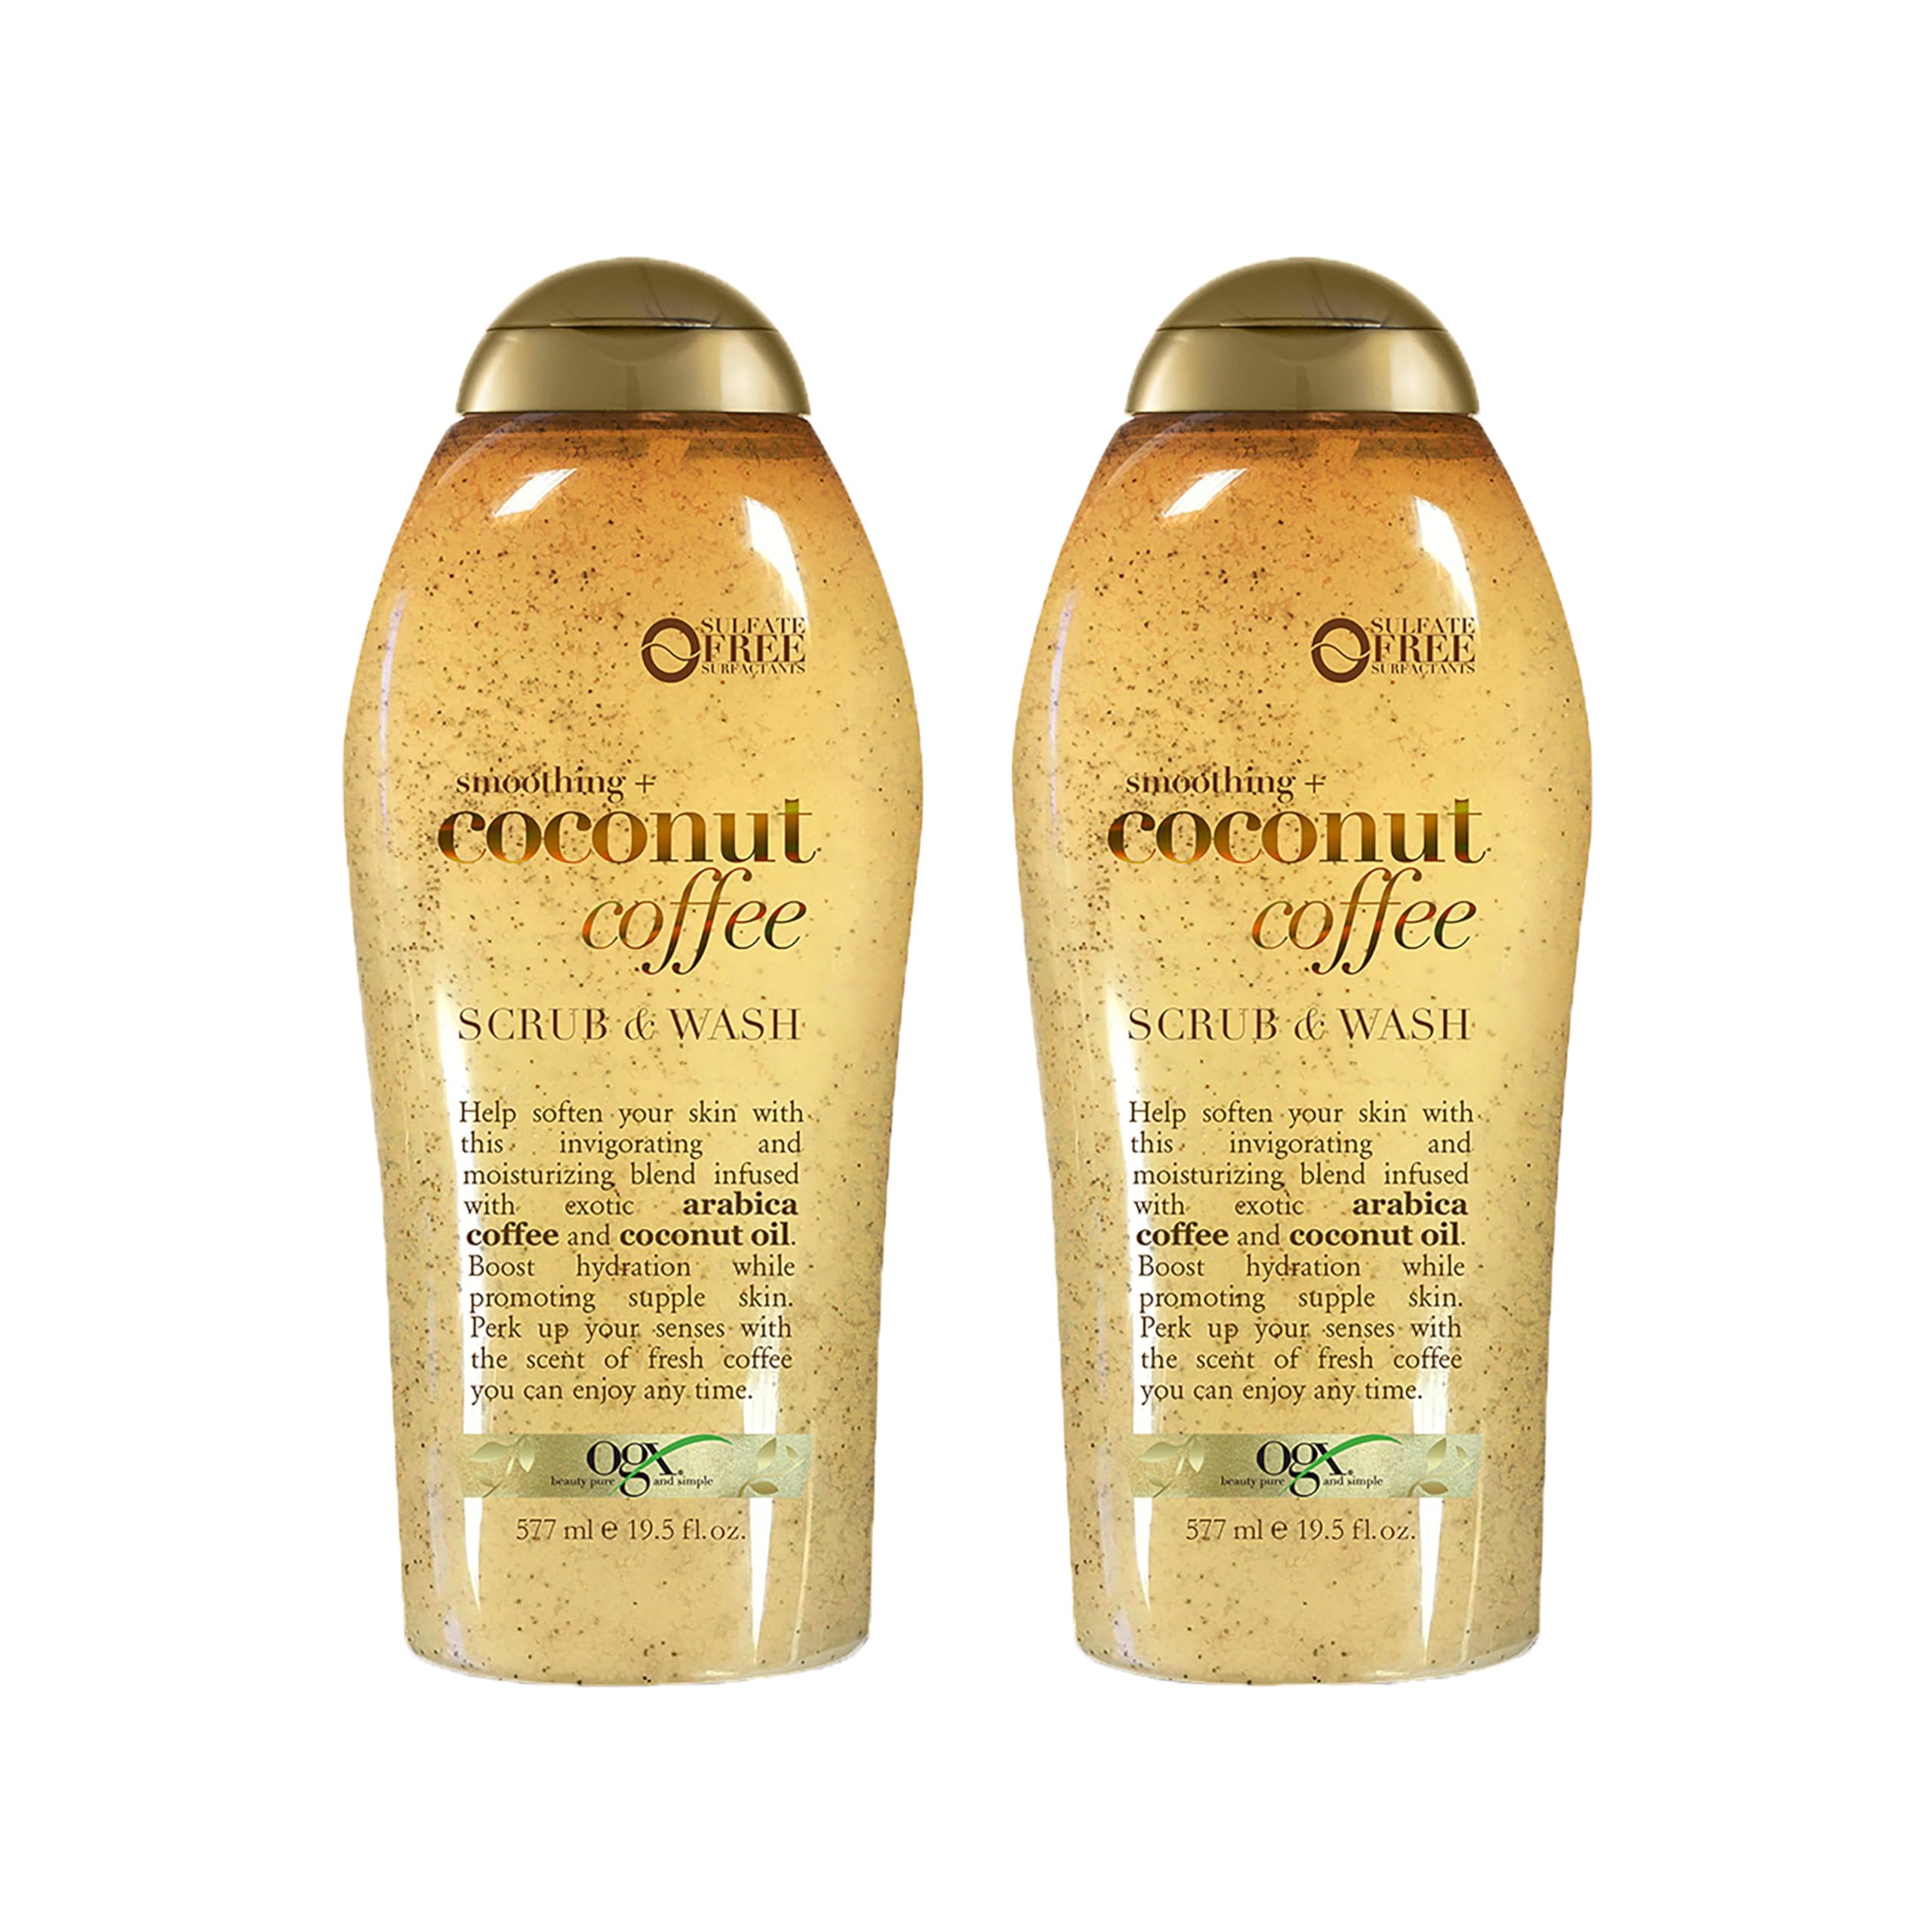 OGX Smoothing + Coconut Coffee Exfoliating Body Scrub with Arabica Coffee & Coconut Oil, Moisturizing Body Wash for Dry Skin, Paraben-Free with Sulfate-Free Surfactants, 19.5 Fl Oz, 2 Pack